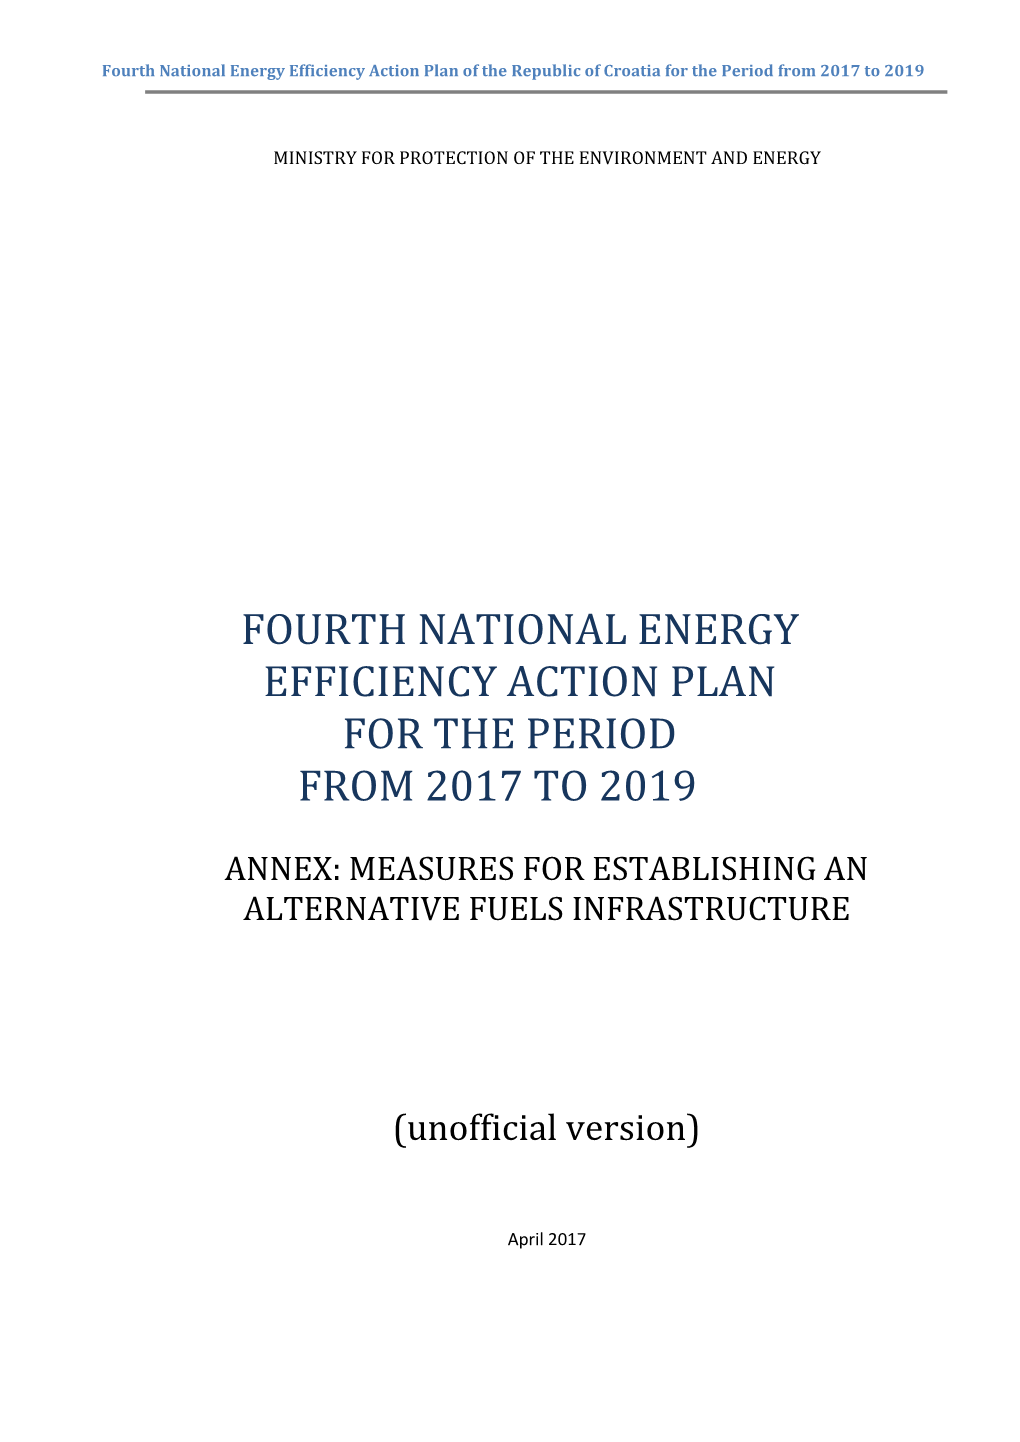 Fourth National Energy Efficiency Action Plan for the Period from 2017 to 2019